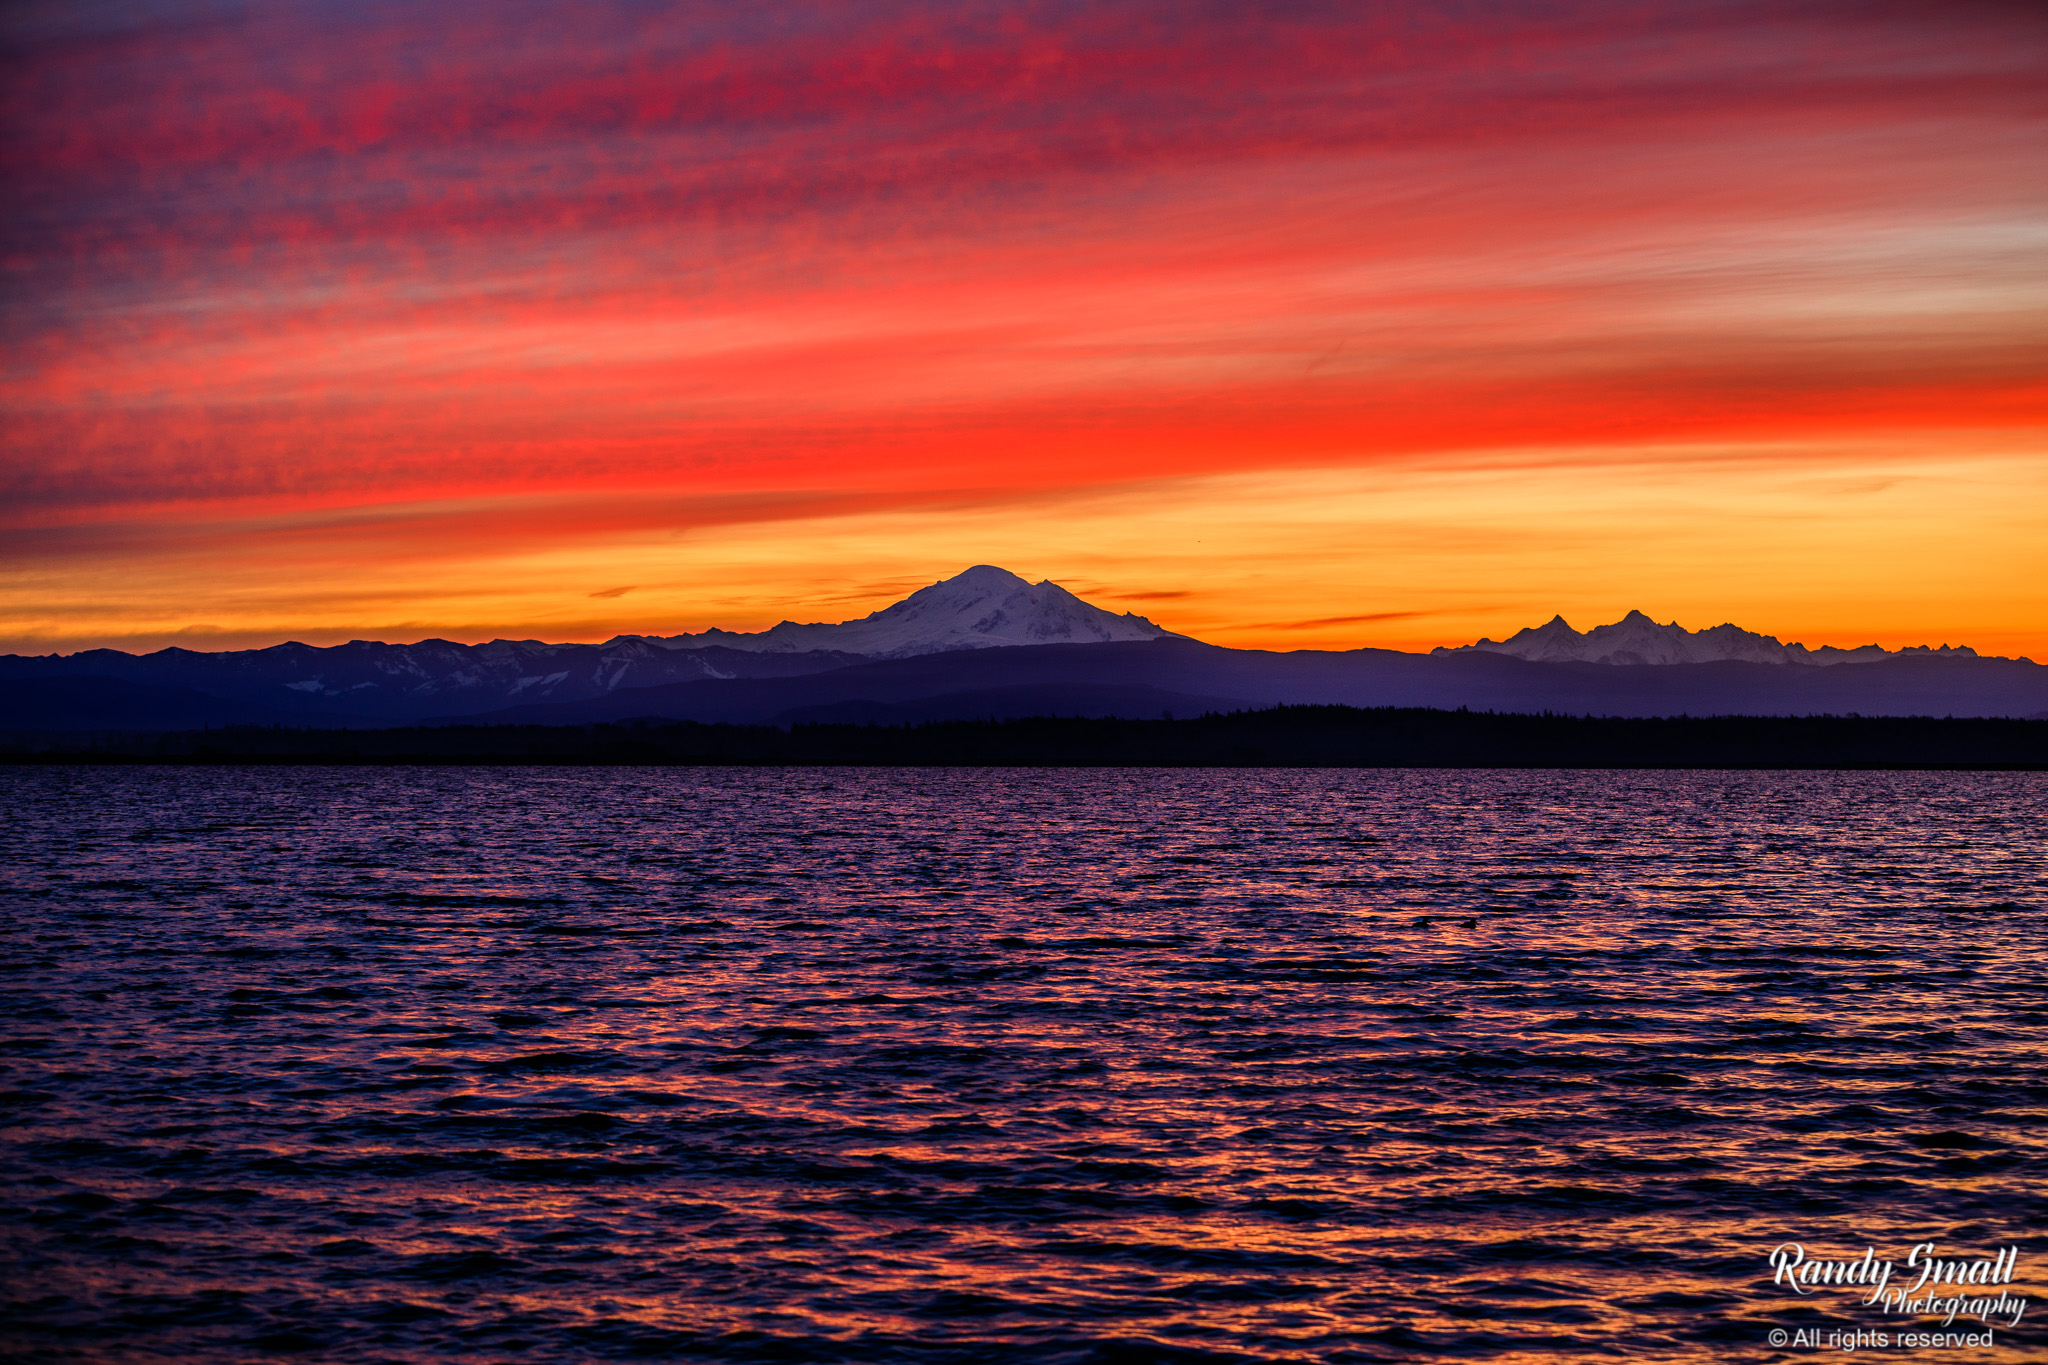 Sunrise from Sandy Point, WA. Mt Baker and the Twin Sisters by Randy Small @RandySmall